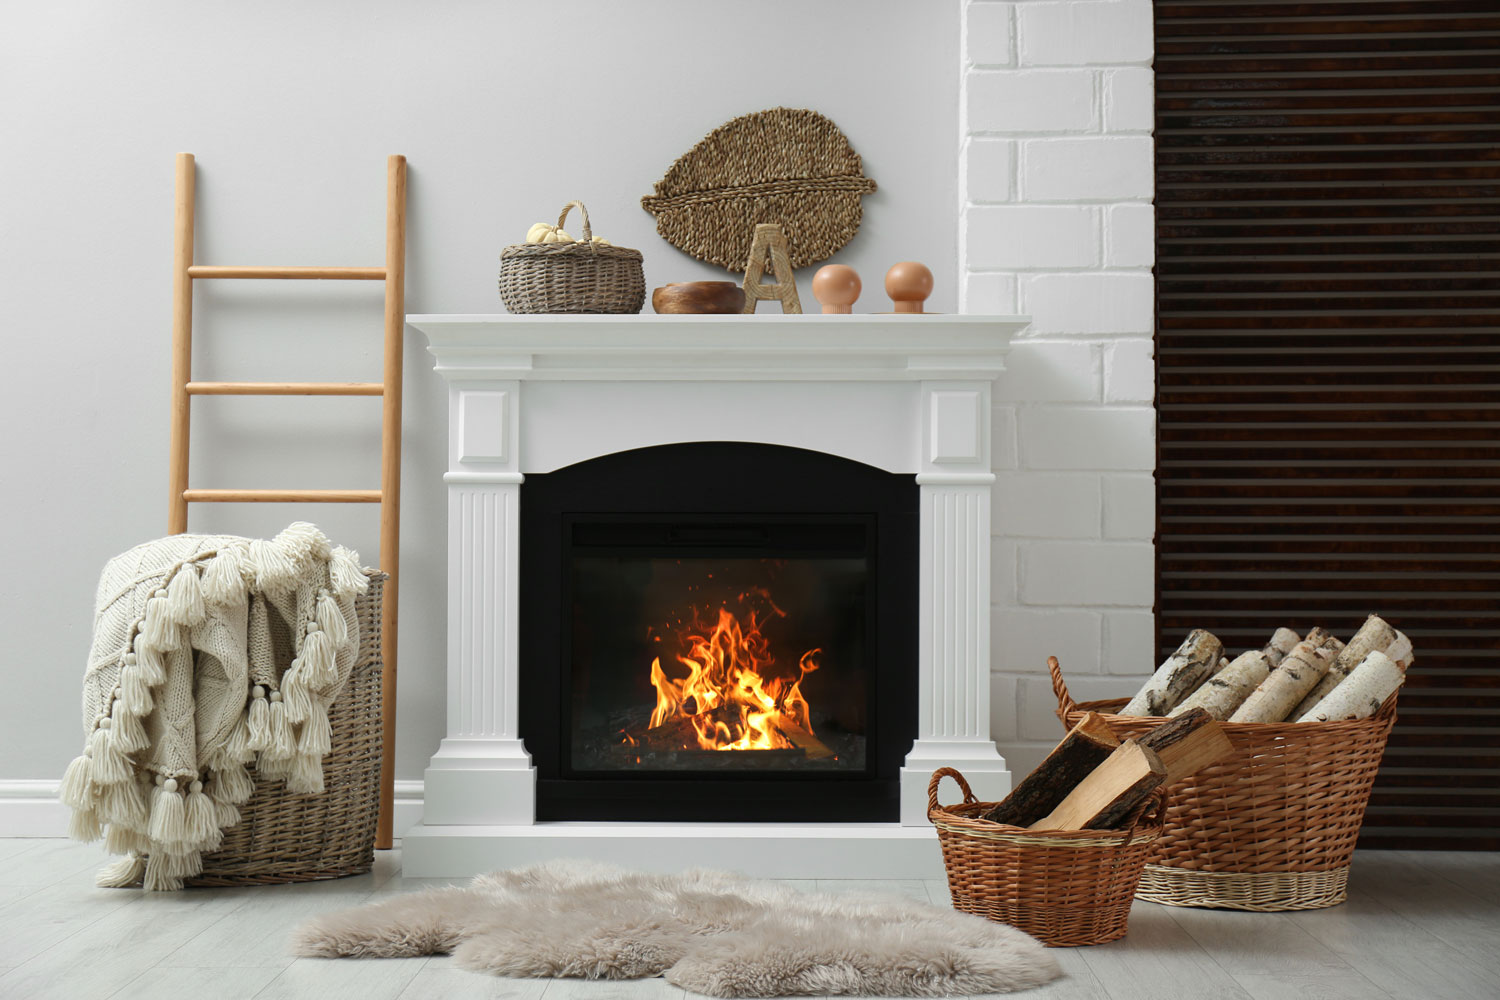 Wicker baskets with firewood and white fireplace in cozy living room, What Are The Parts Of A Fireplace?